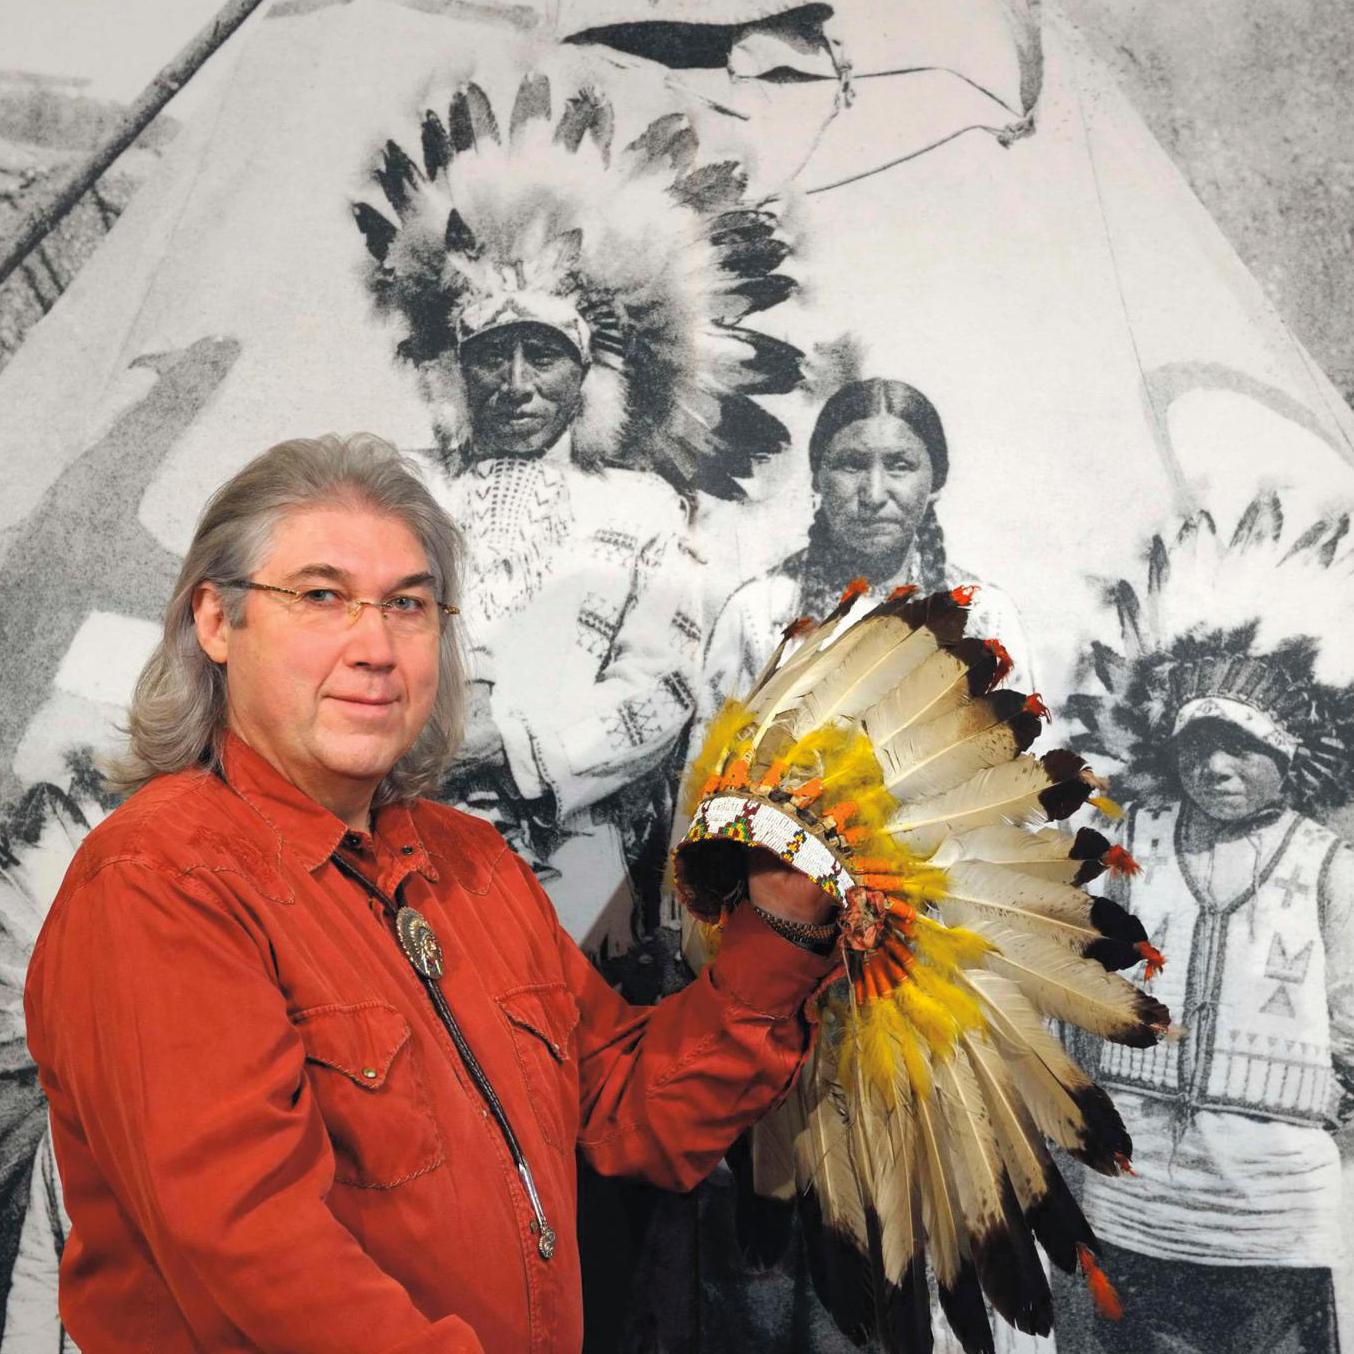 François Chladiuk, in the Footsteps of the Lakota - Interviews